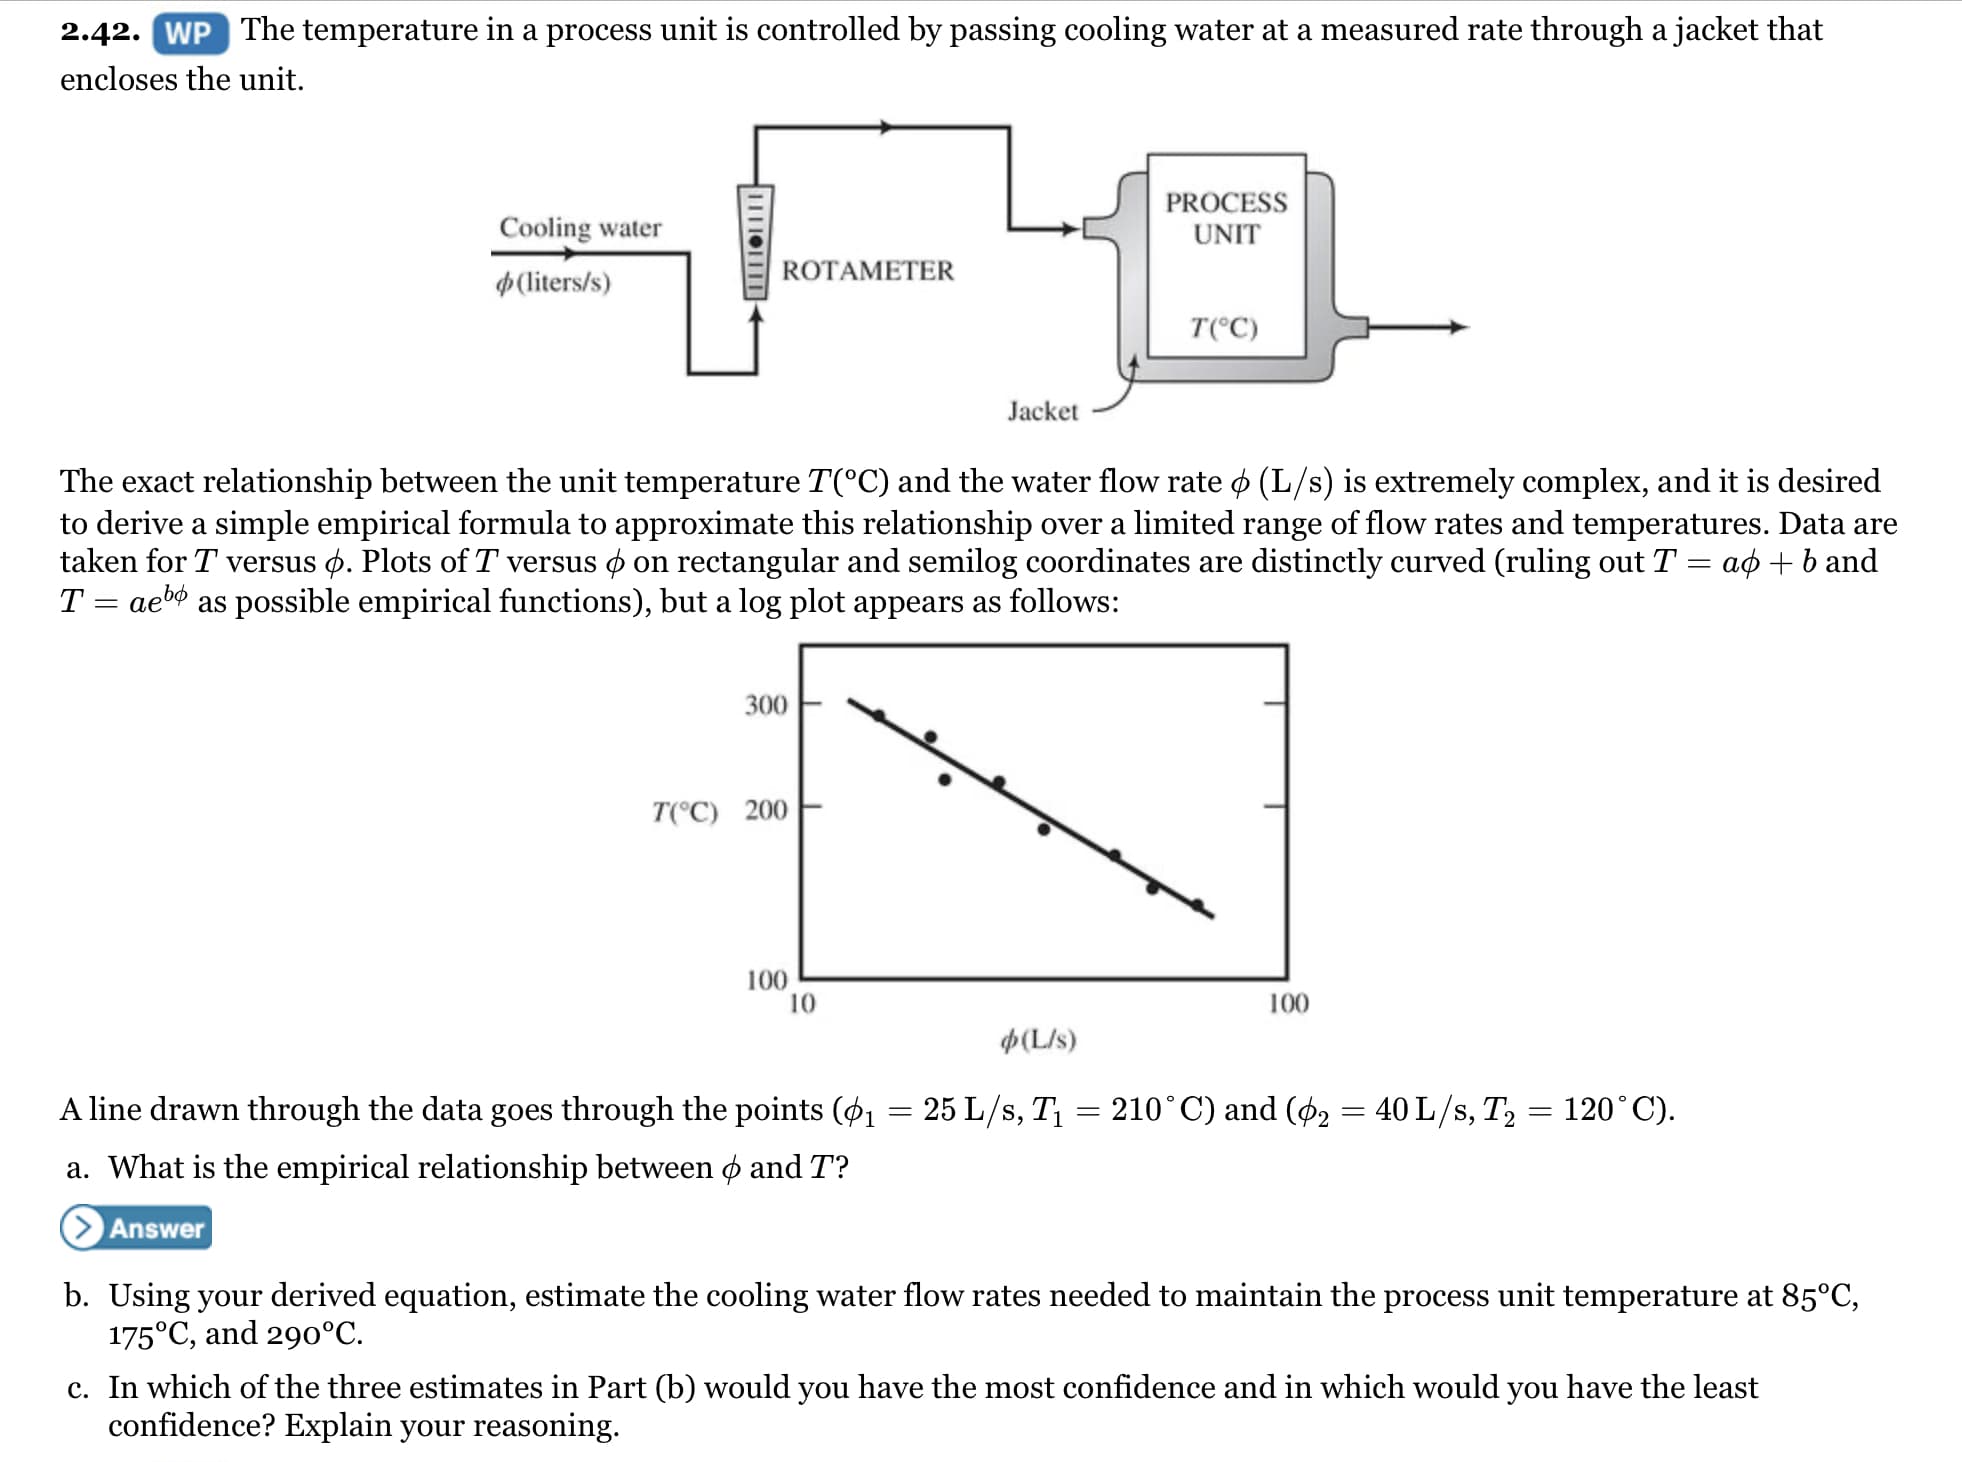 2.42. WP The temperature in a process unit is controlled by passing cooling water at a measured rate through a jacket that
encloses the unit.
Cooling water
PROCESS
UNIT
ROTAMETER
p(liters/s)
T(°C)
Jacket
The exact relationship between the unit temperature T(°C) and the water flow rate o (L/s) is extremely complex, and it is desired
to derive a simple empirical formula to approximate this relationship over a limited range of flow rates and temperatures. Data are
taken for T versus ø. Plots of T versus ø on rectangular and semilog coordinates are distinctly curved (ruling out T = aø + b and
T = aebó as possible empirical functions), but a log plot appears as follows:
300
T(°C) 200
100
10
100
p(L/s)
A line drawn through the data goes through the points (ø1 = 25 L/s, T = 210°C) and (ø2 = 40 L/s, T, = 120°C).
a. What is the empirical relationship between o and T?
Answer
b. Using your derived equation, estimate the cooling water flow rates needed to maintain the process unit temperature at 85°C,
175°C, and 290°C.
c. In which of the three estimates in Part (b) would you have the most confidence and in which would you have the least
confidence? Explain your reasoning.
